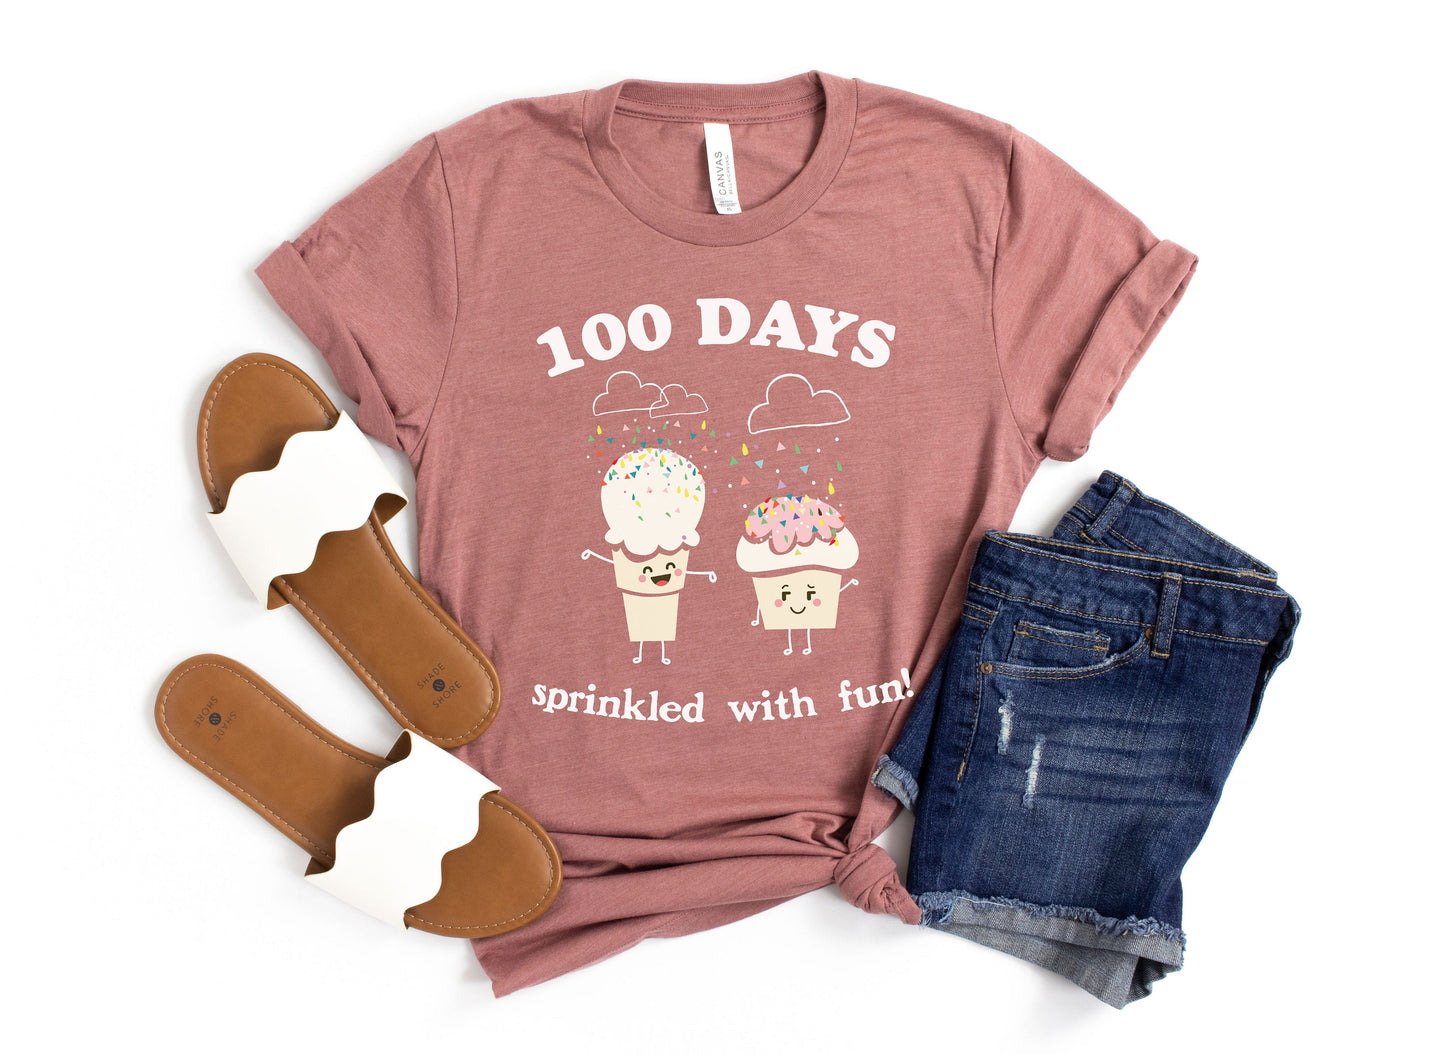 100 Days of School Sprinkled with Fun Icecream Cupcake Teachers Ultra Soft Graphic Tee Unisex Soft Tee T-shirt for Women or Men